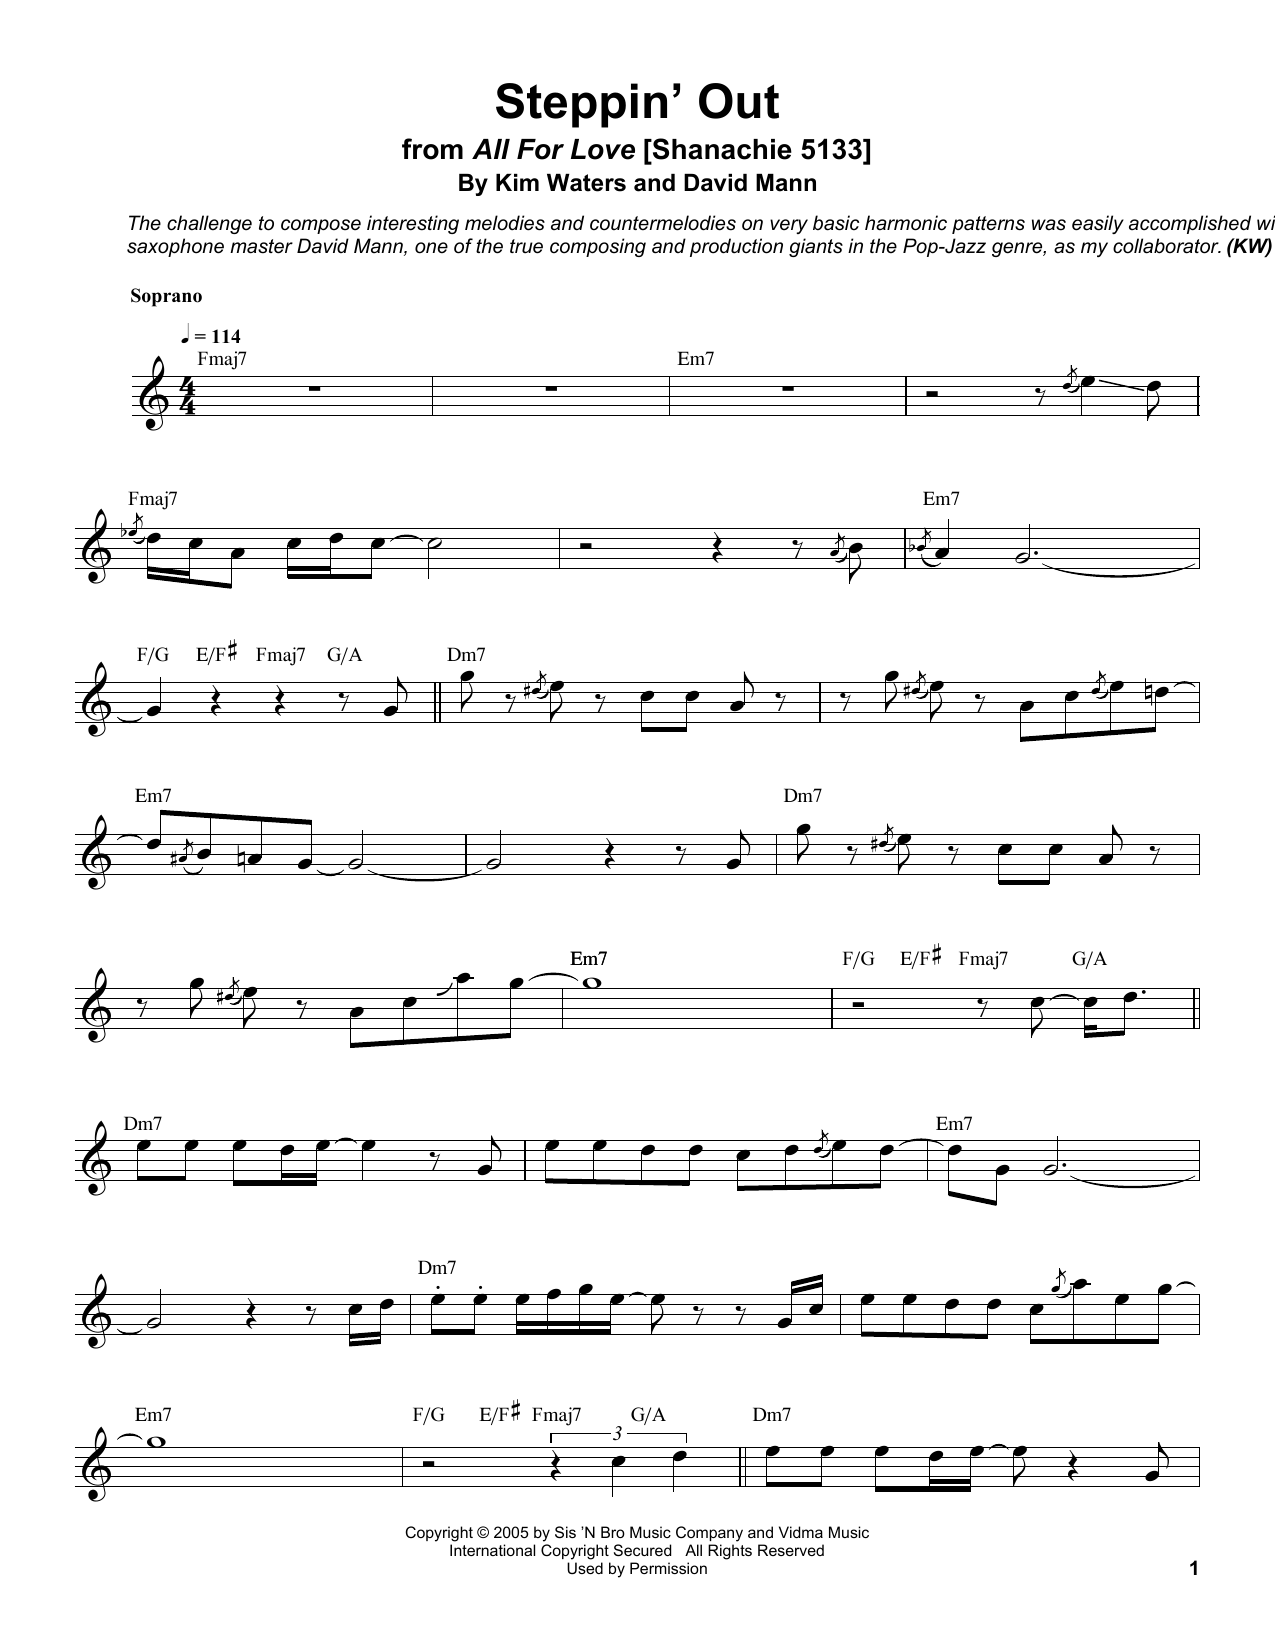 Download Kim Waters Steppin' Out Sheet Music